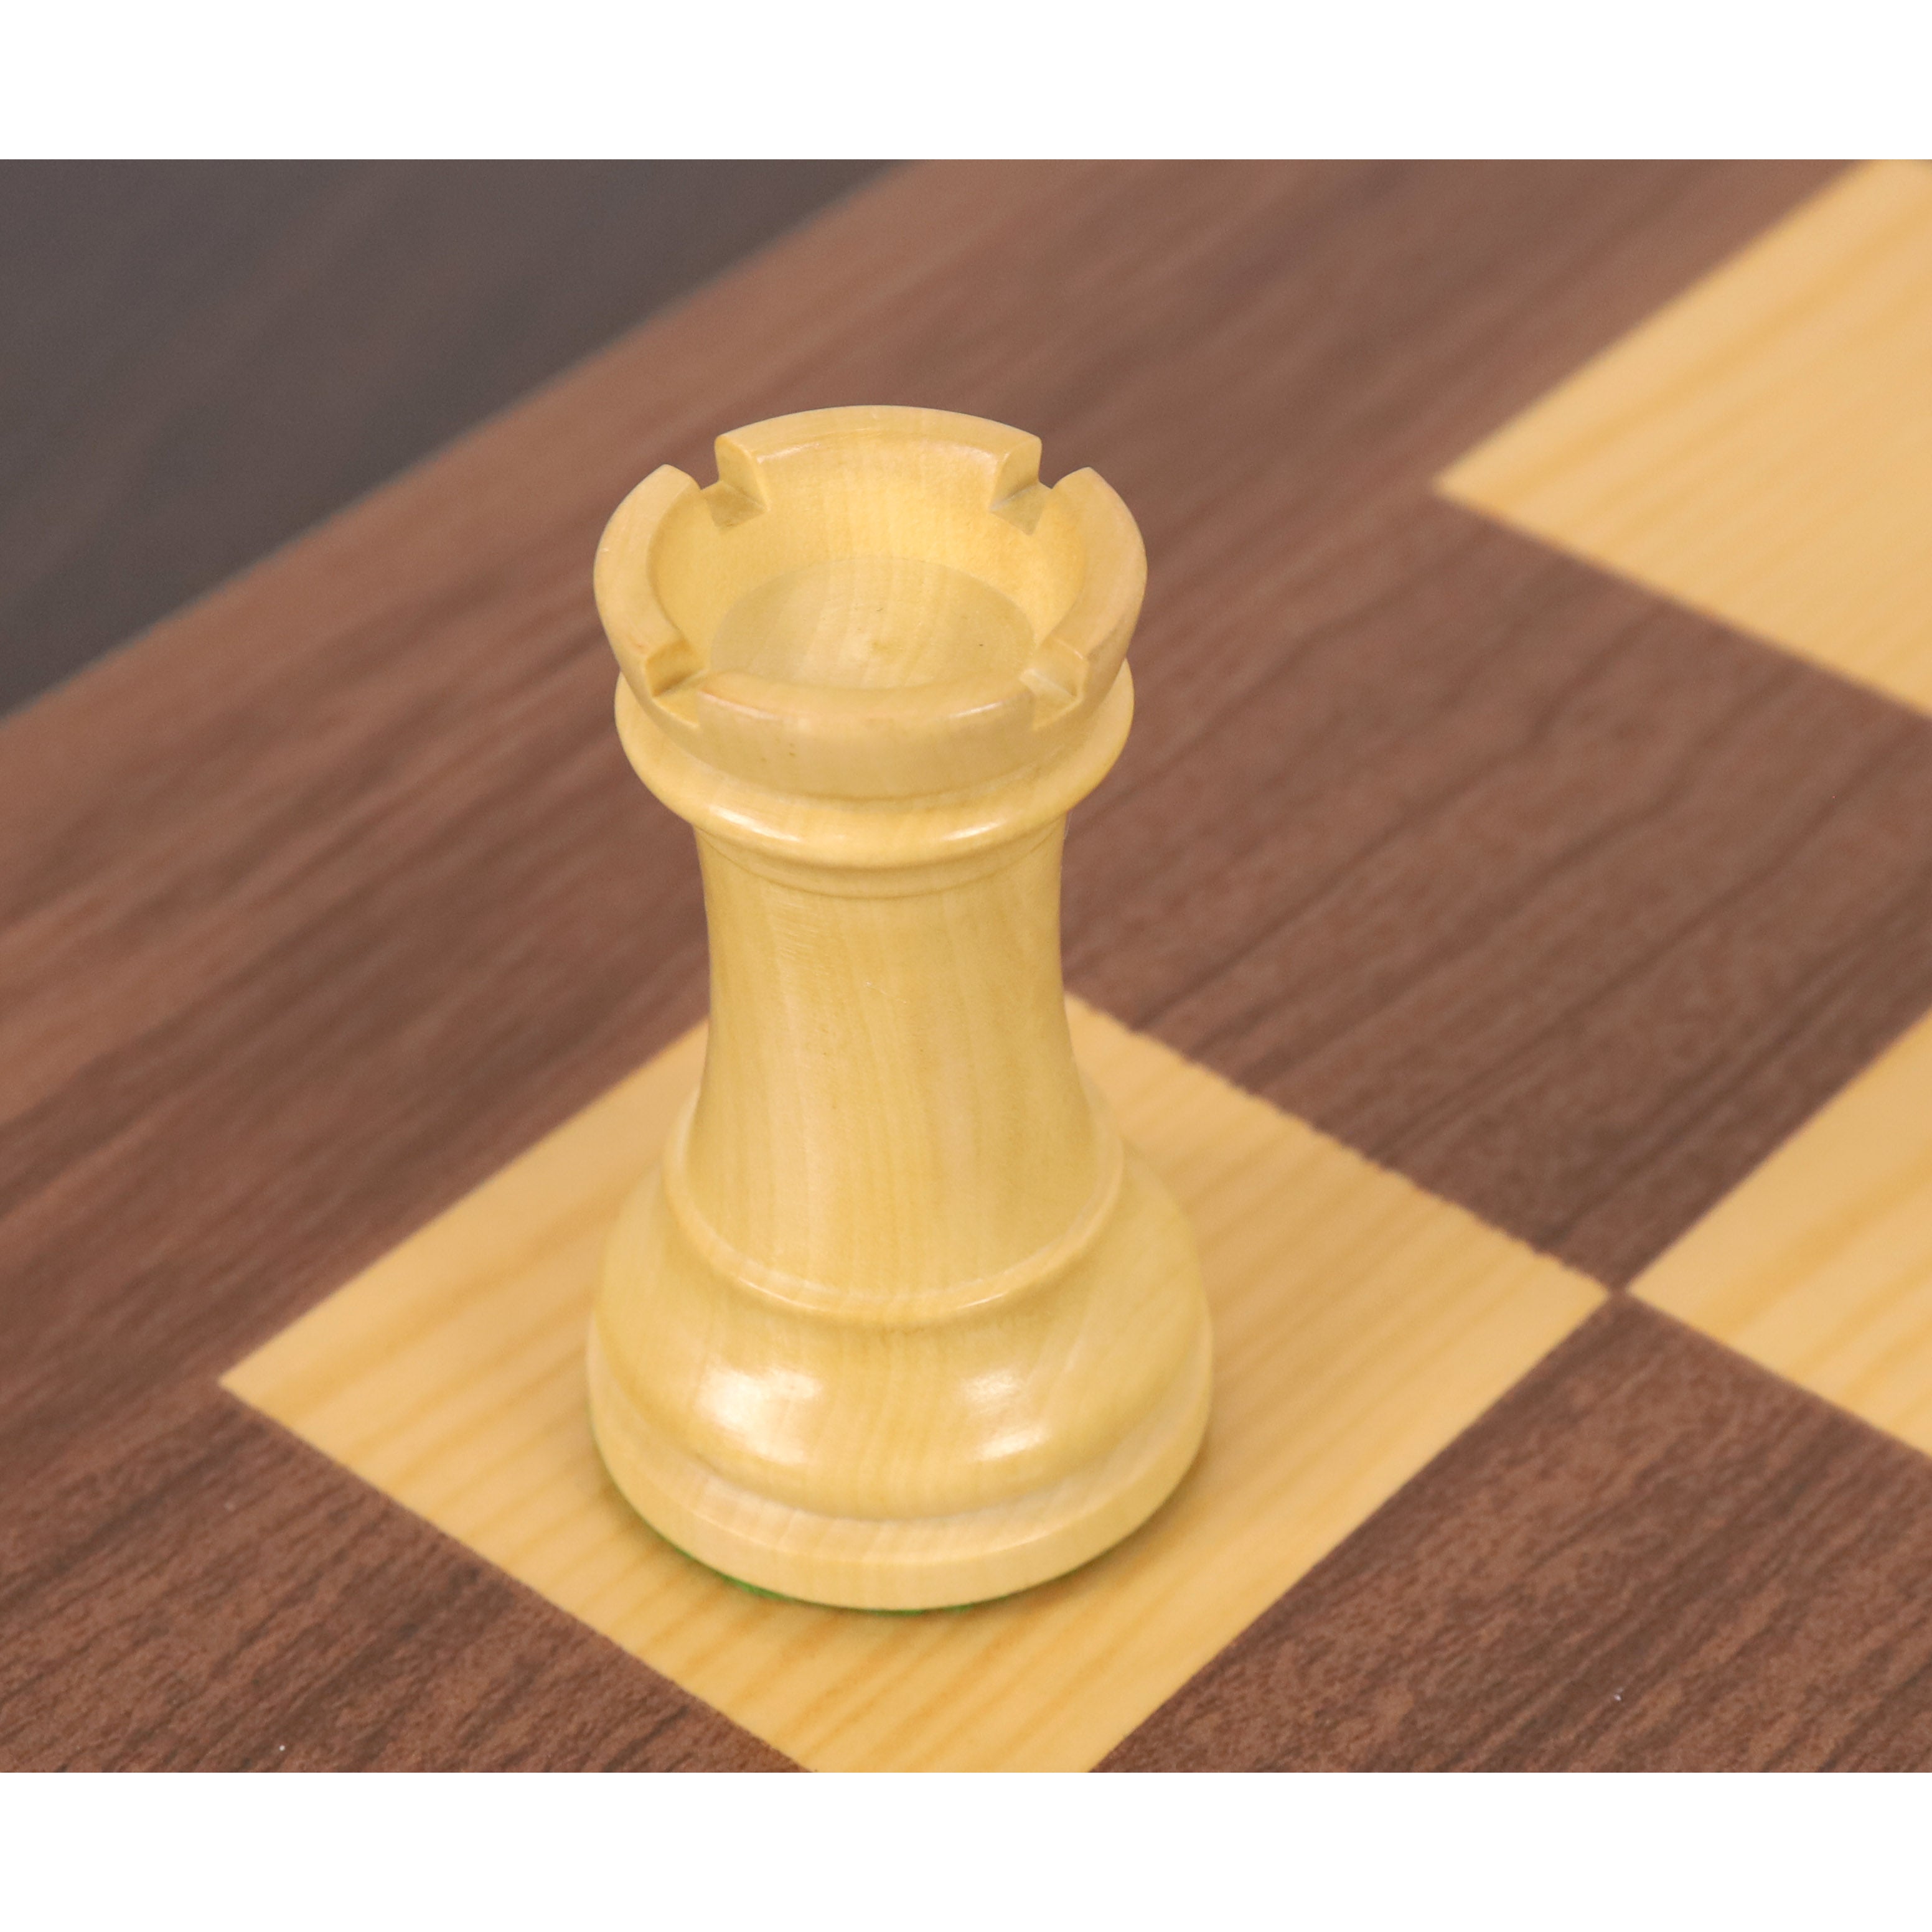 Guest Post] How to Write a Chess Variant Website in Six Months